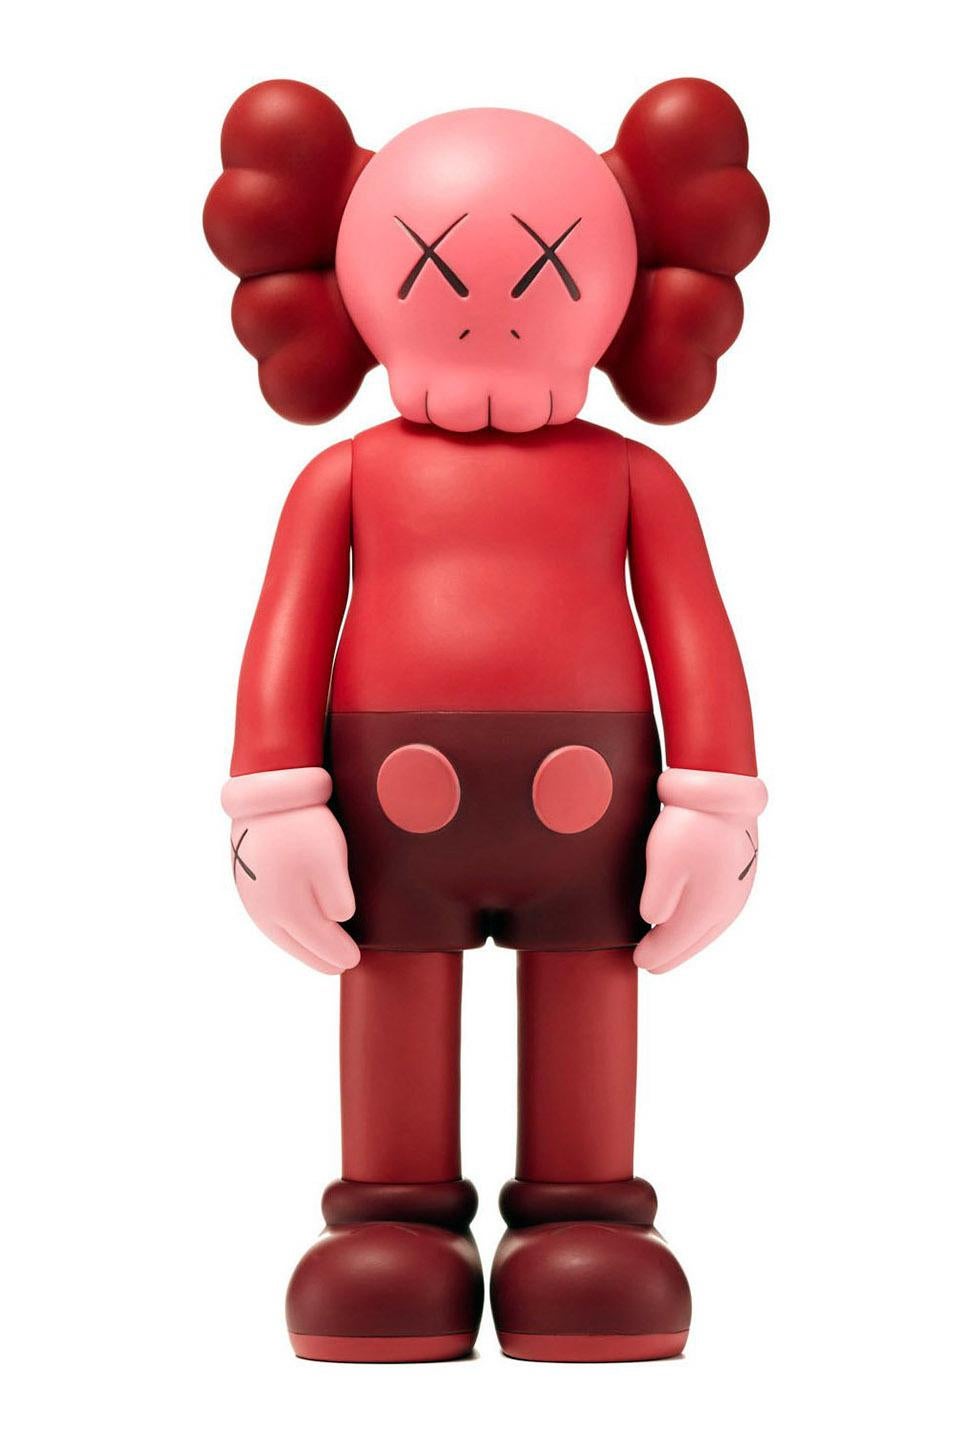 KAWS Companions 2016 (Set of 4 individual works):
KAWS Companion: Brown, Black, Grey & Red full body 2016 - each, new and sealed in their original packaging. These iconic KAWS figurative sculptures were published by Medicom Japan in conjunction with